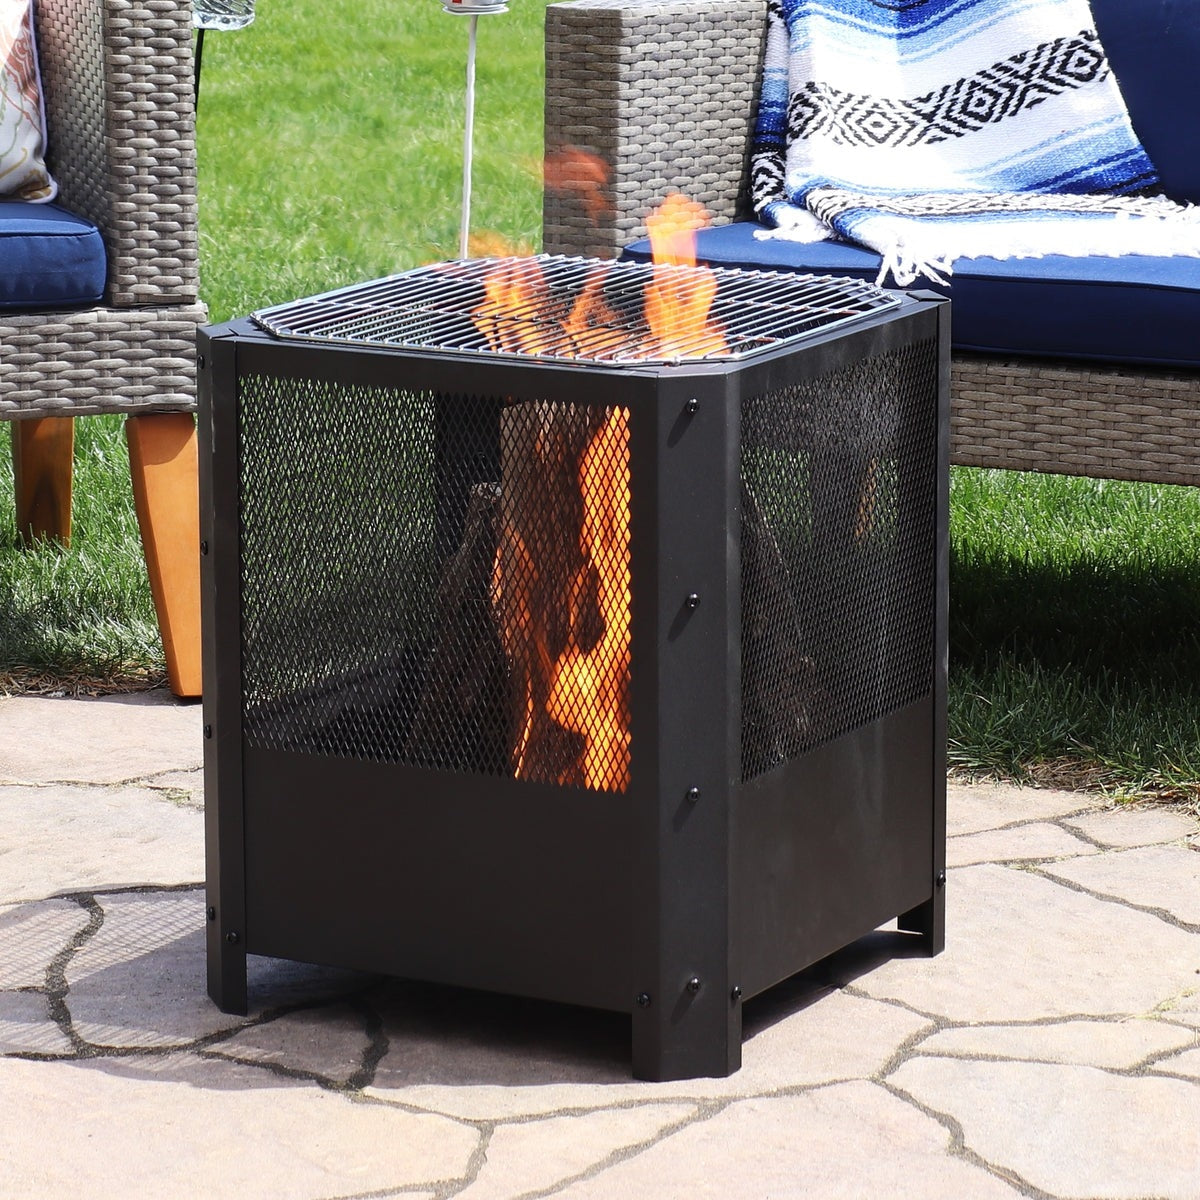 Outdoor > Outdoor Decor > Fire Pits - 16 Inch Small Grelha Square Outdoor Fire Pit With Grilling Grate